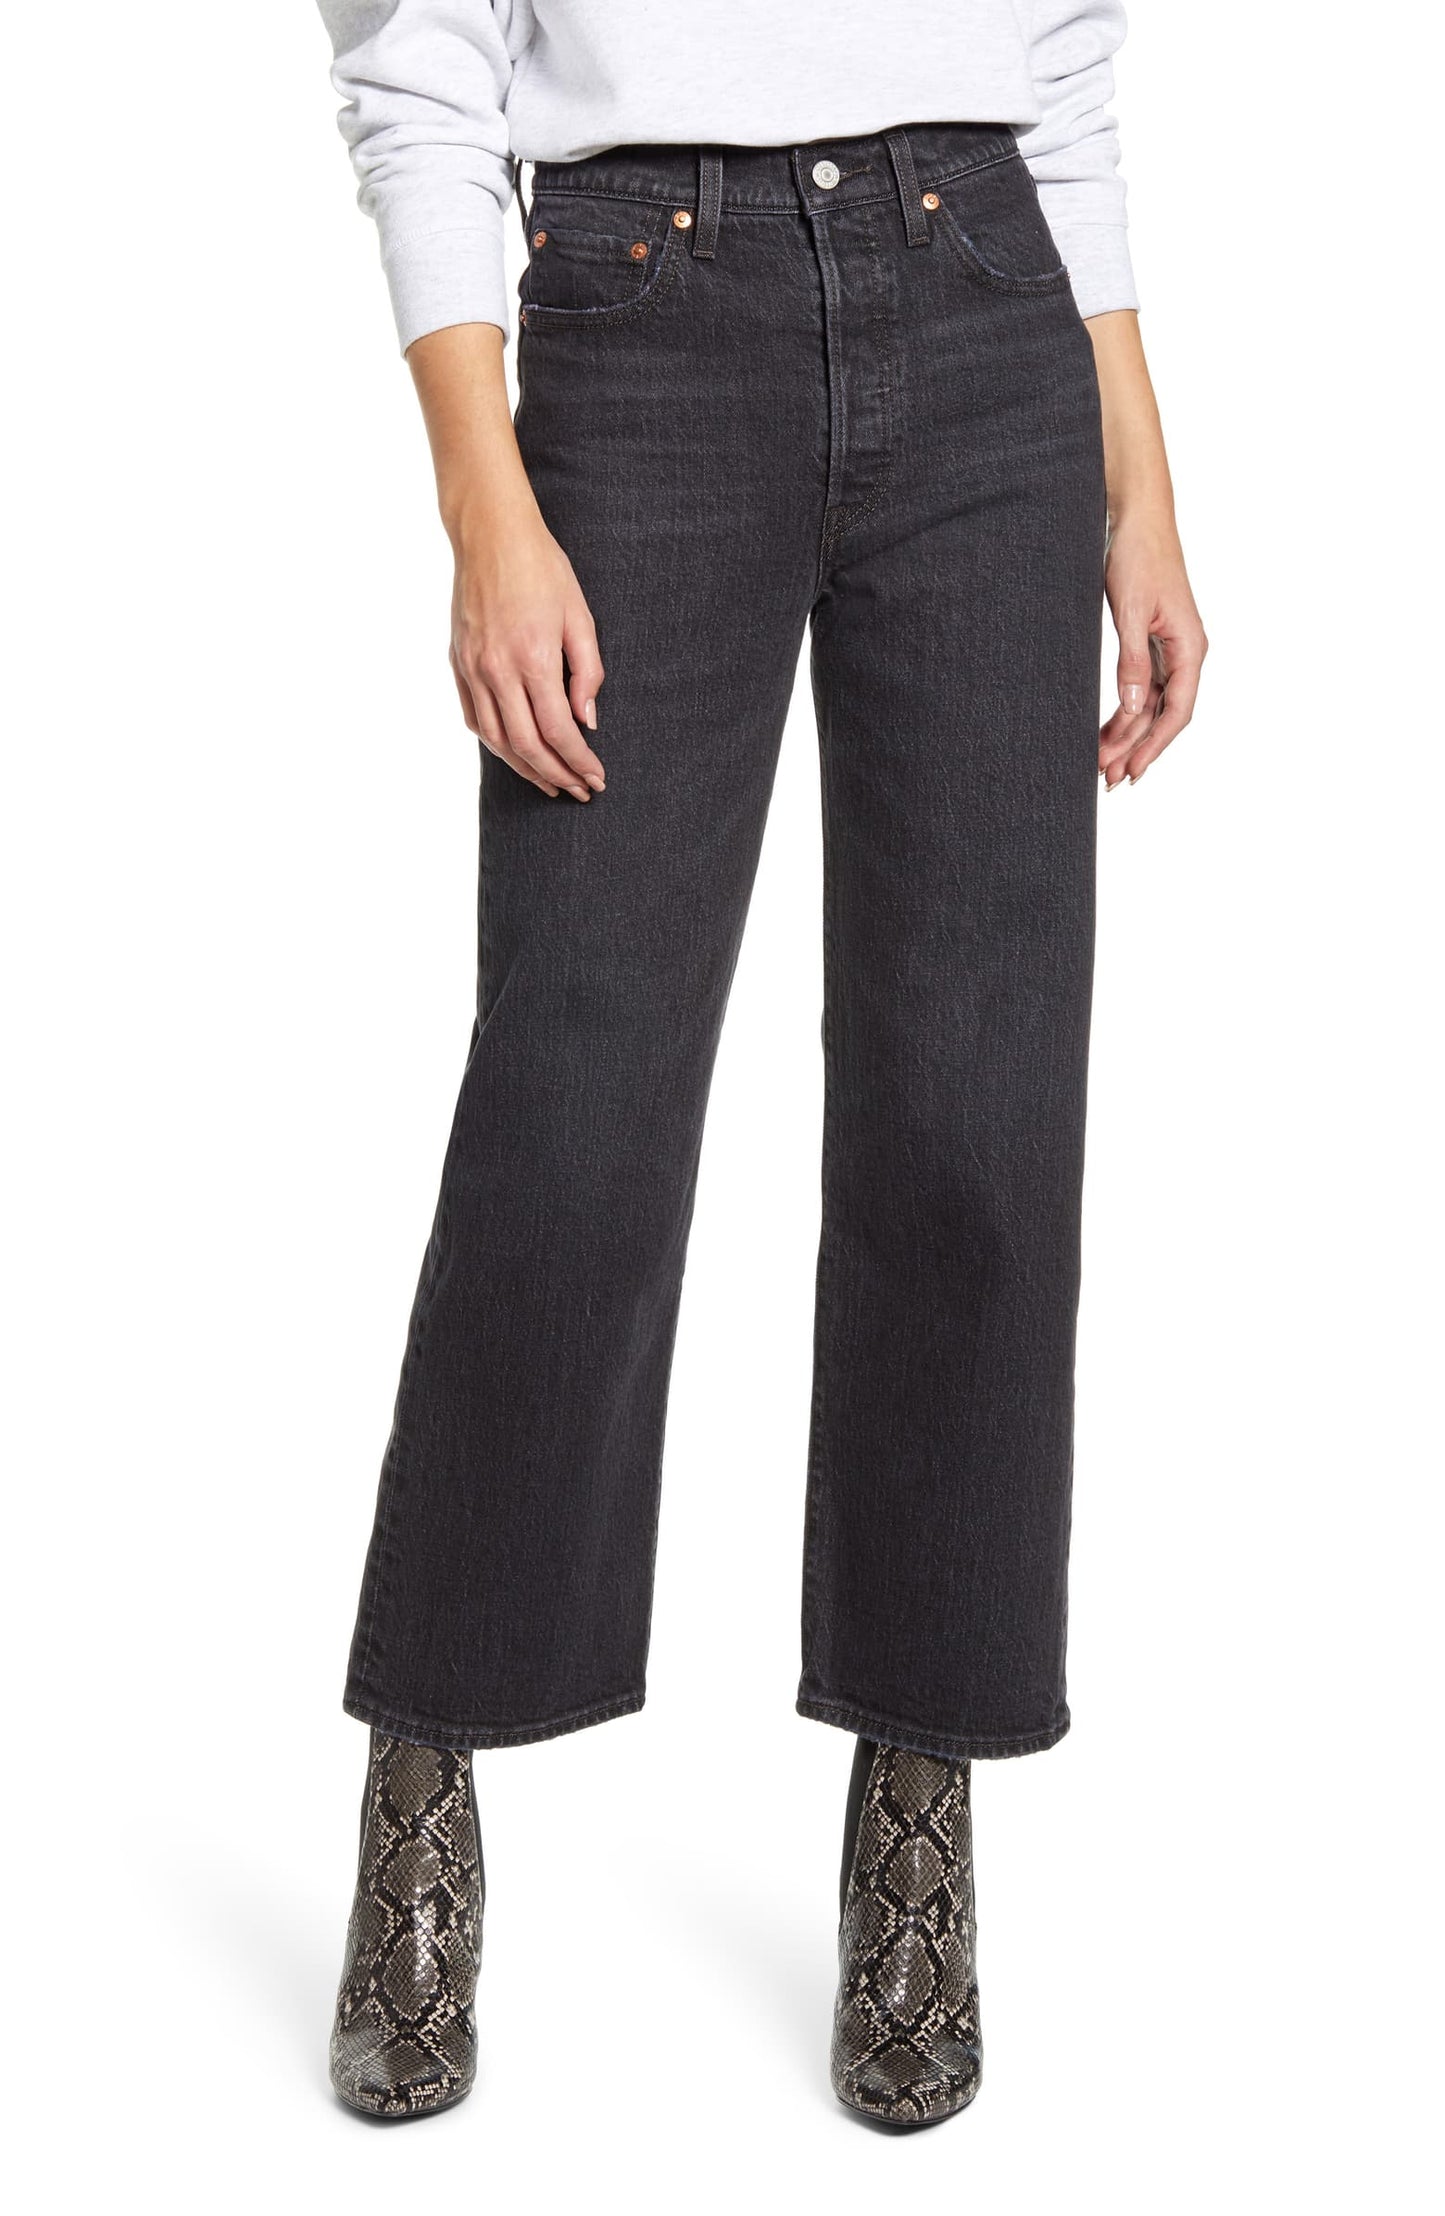 Levi's - Ribcage Straight Ankle Jeans